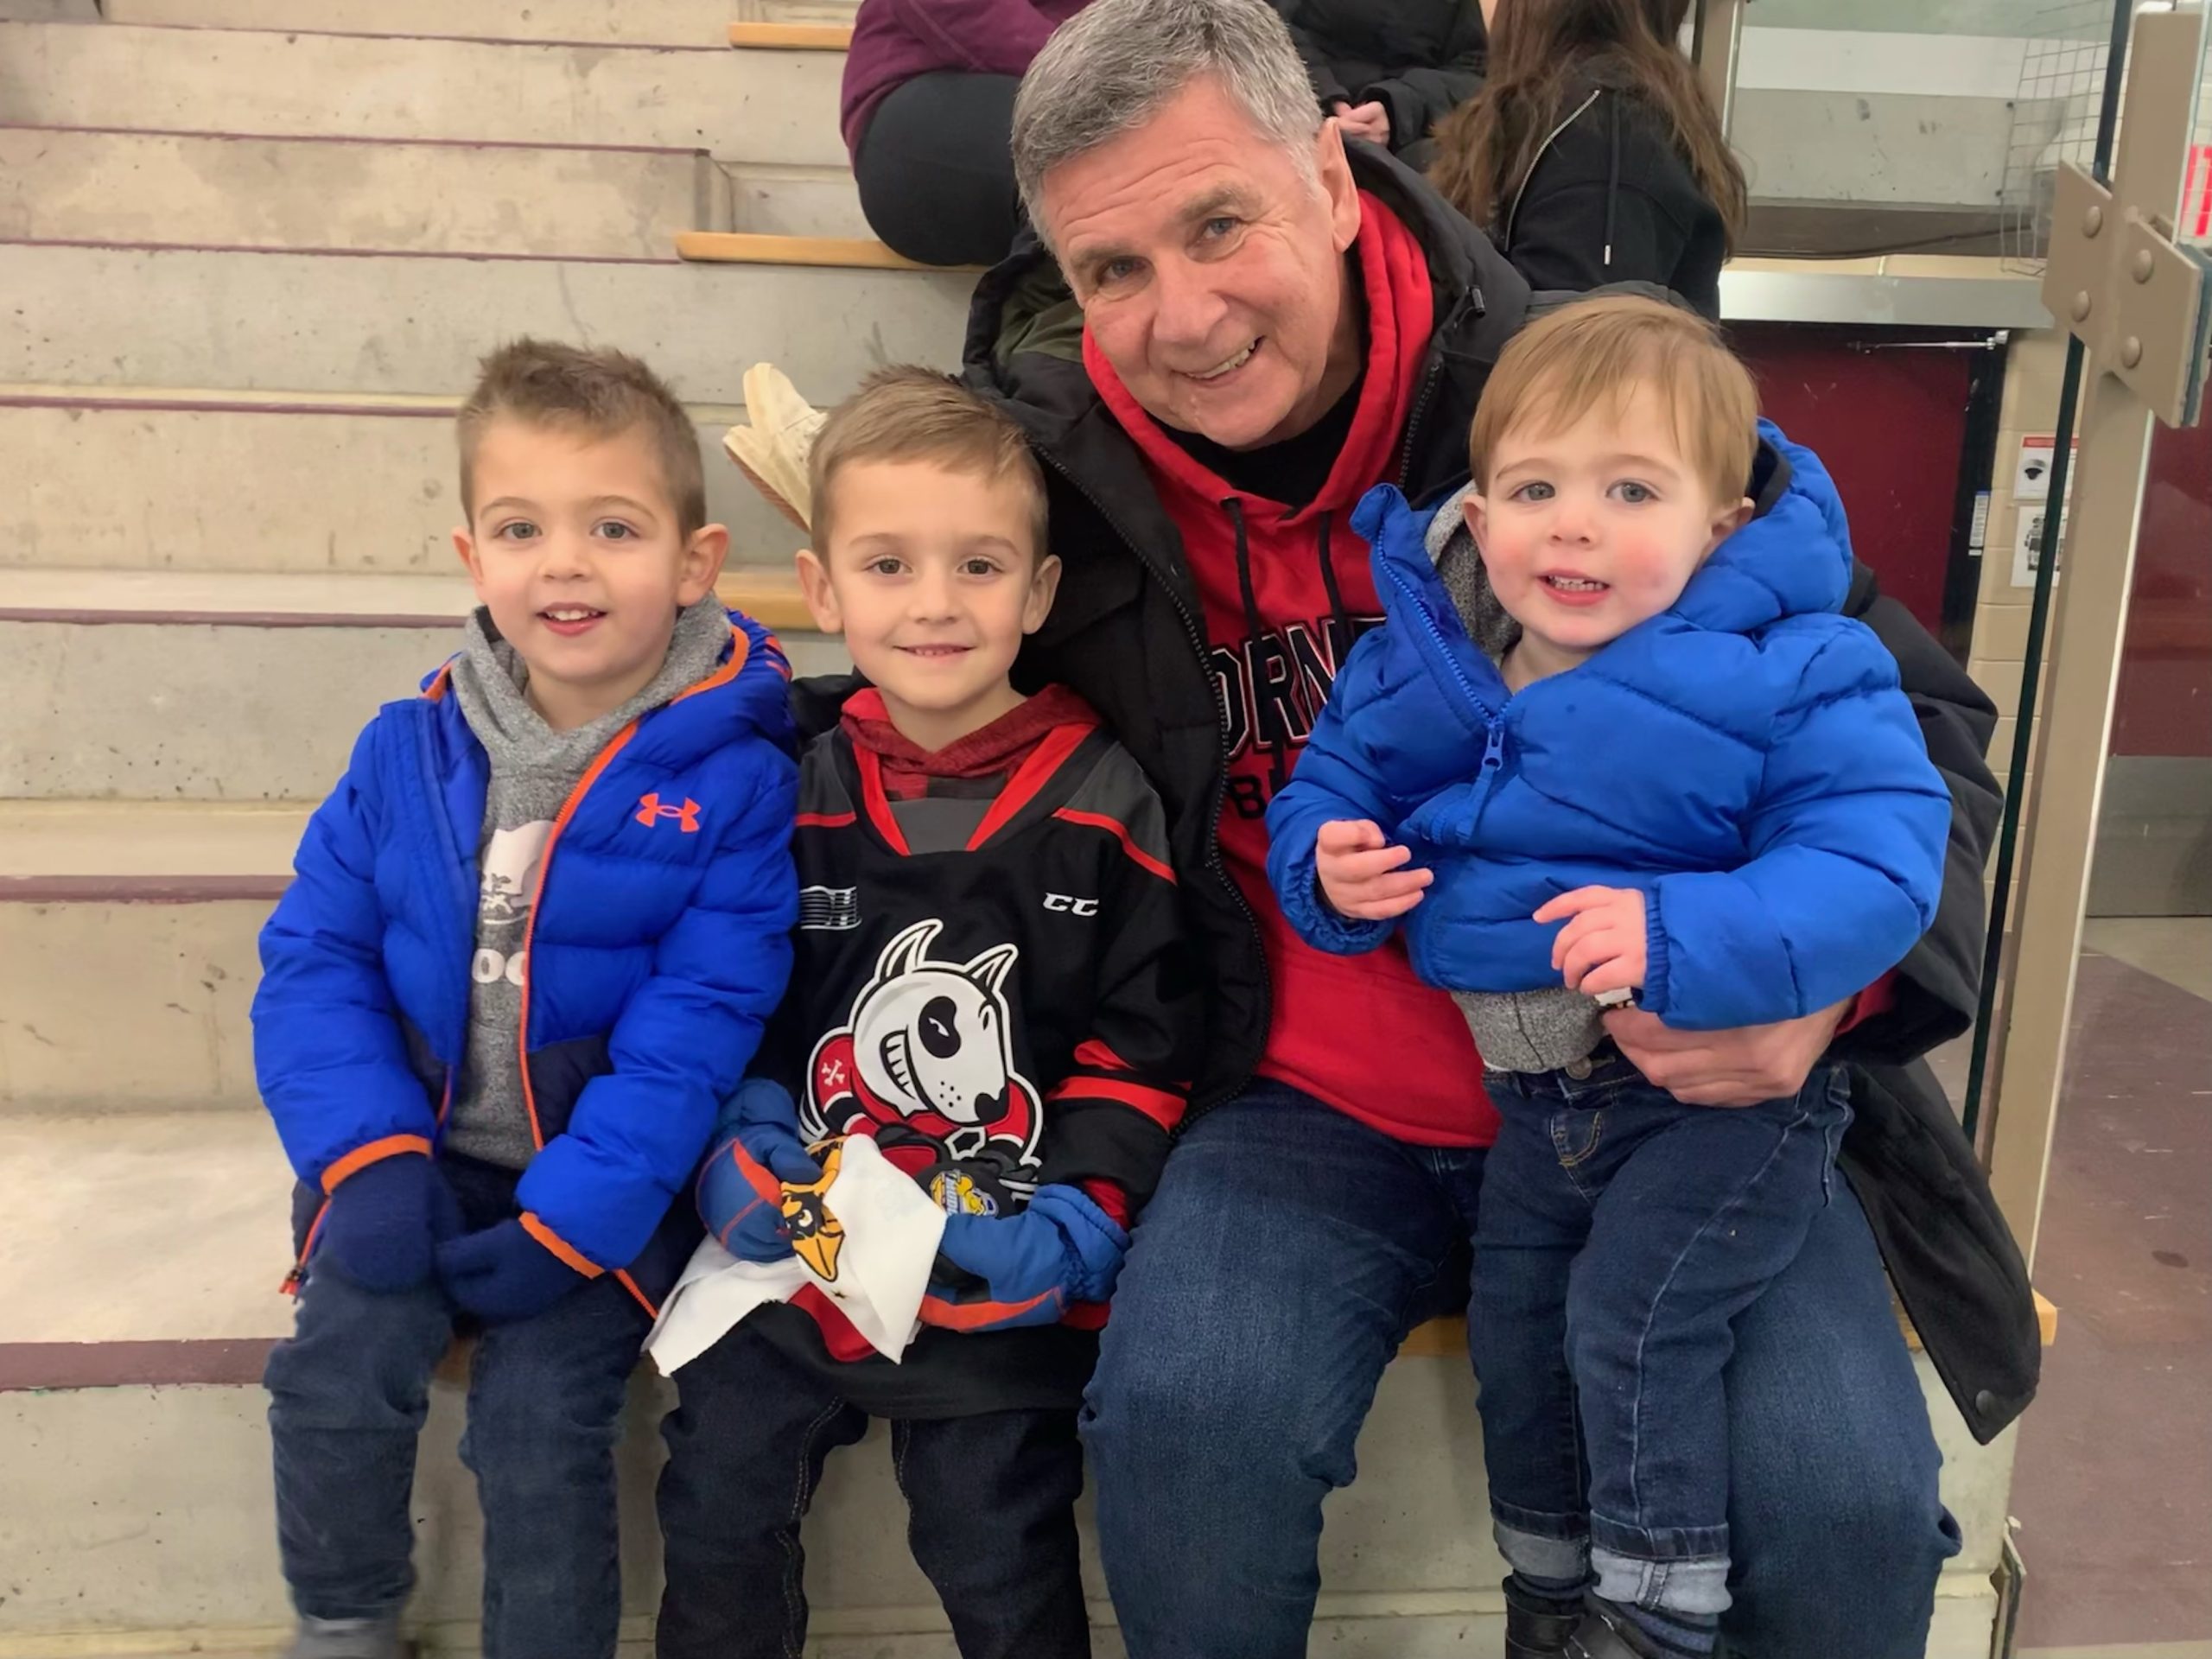 Terry and his grand children at a hockey game.